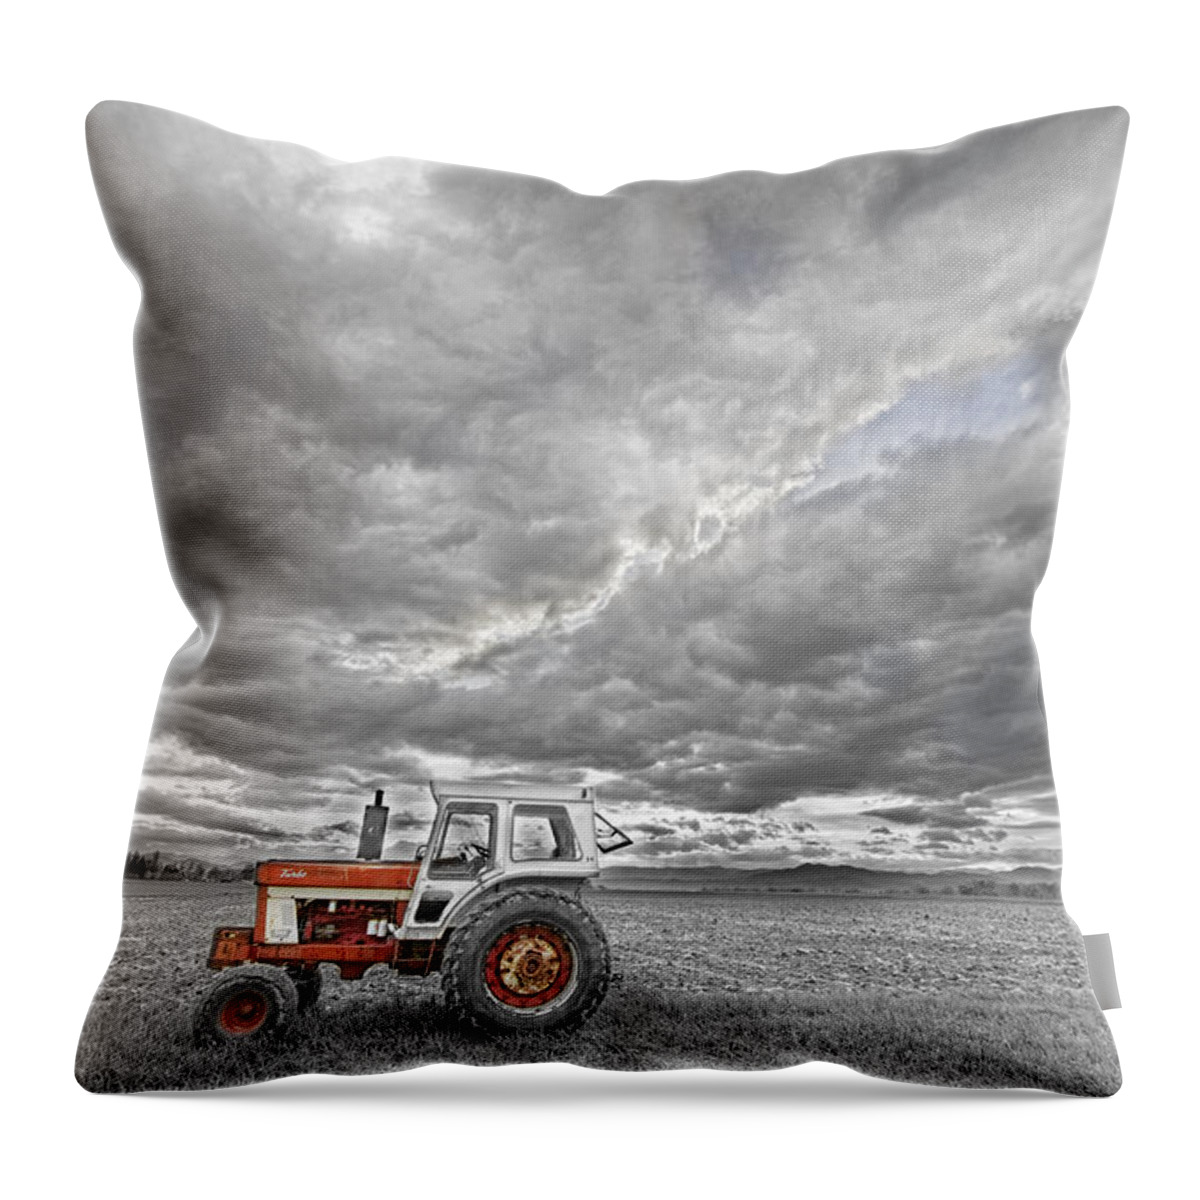 Farming Throw Pillow featuring the photograph Turbo Tractor Superman Country Evening Skies by James BO Insogna